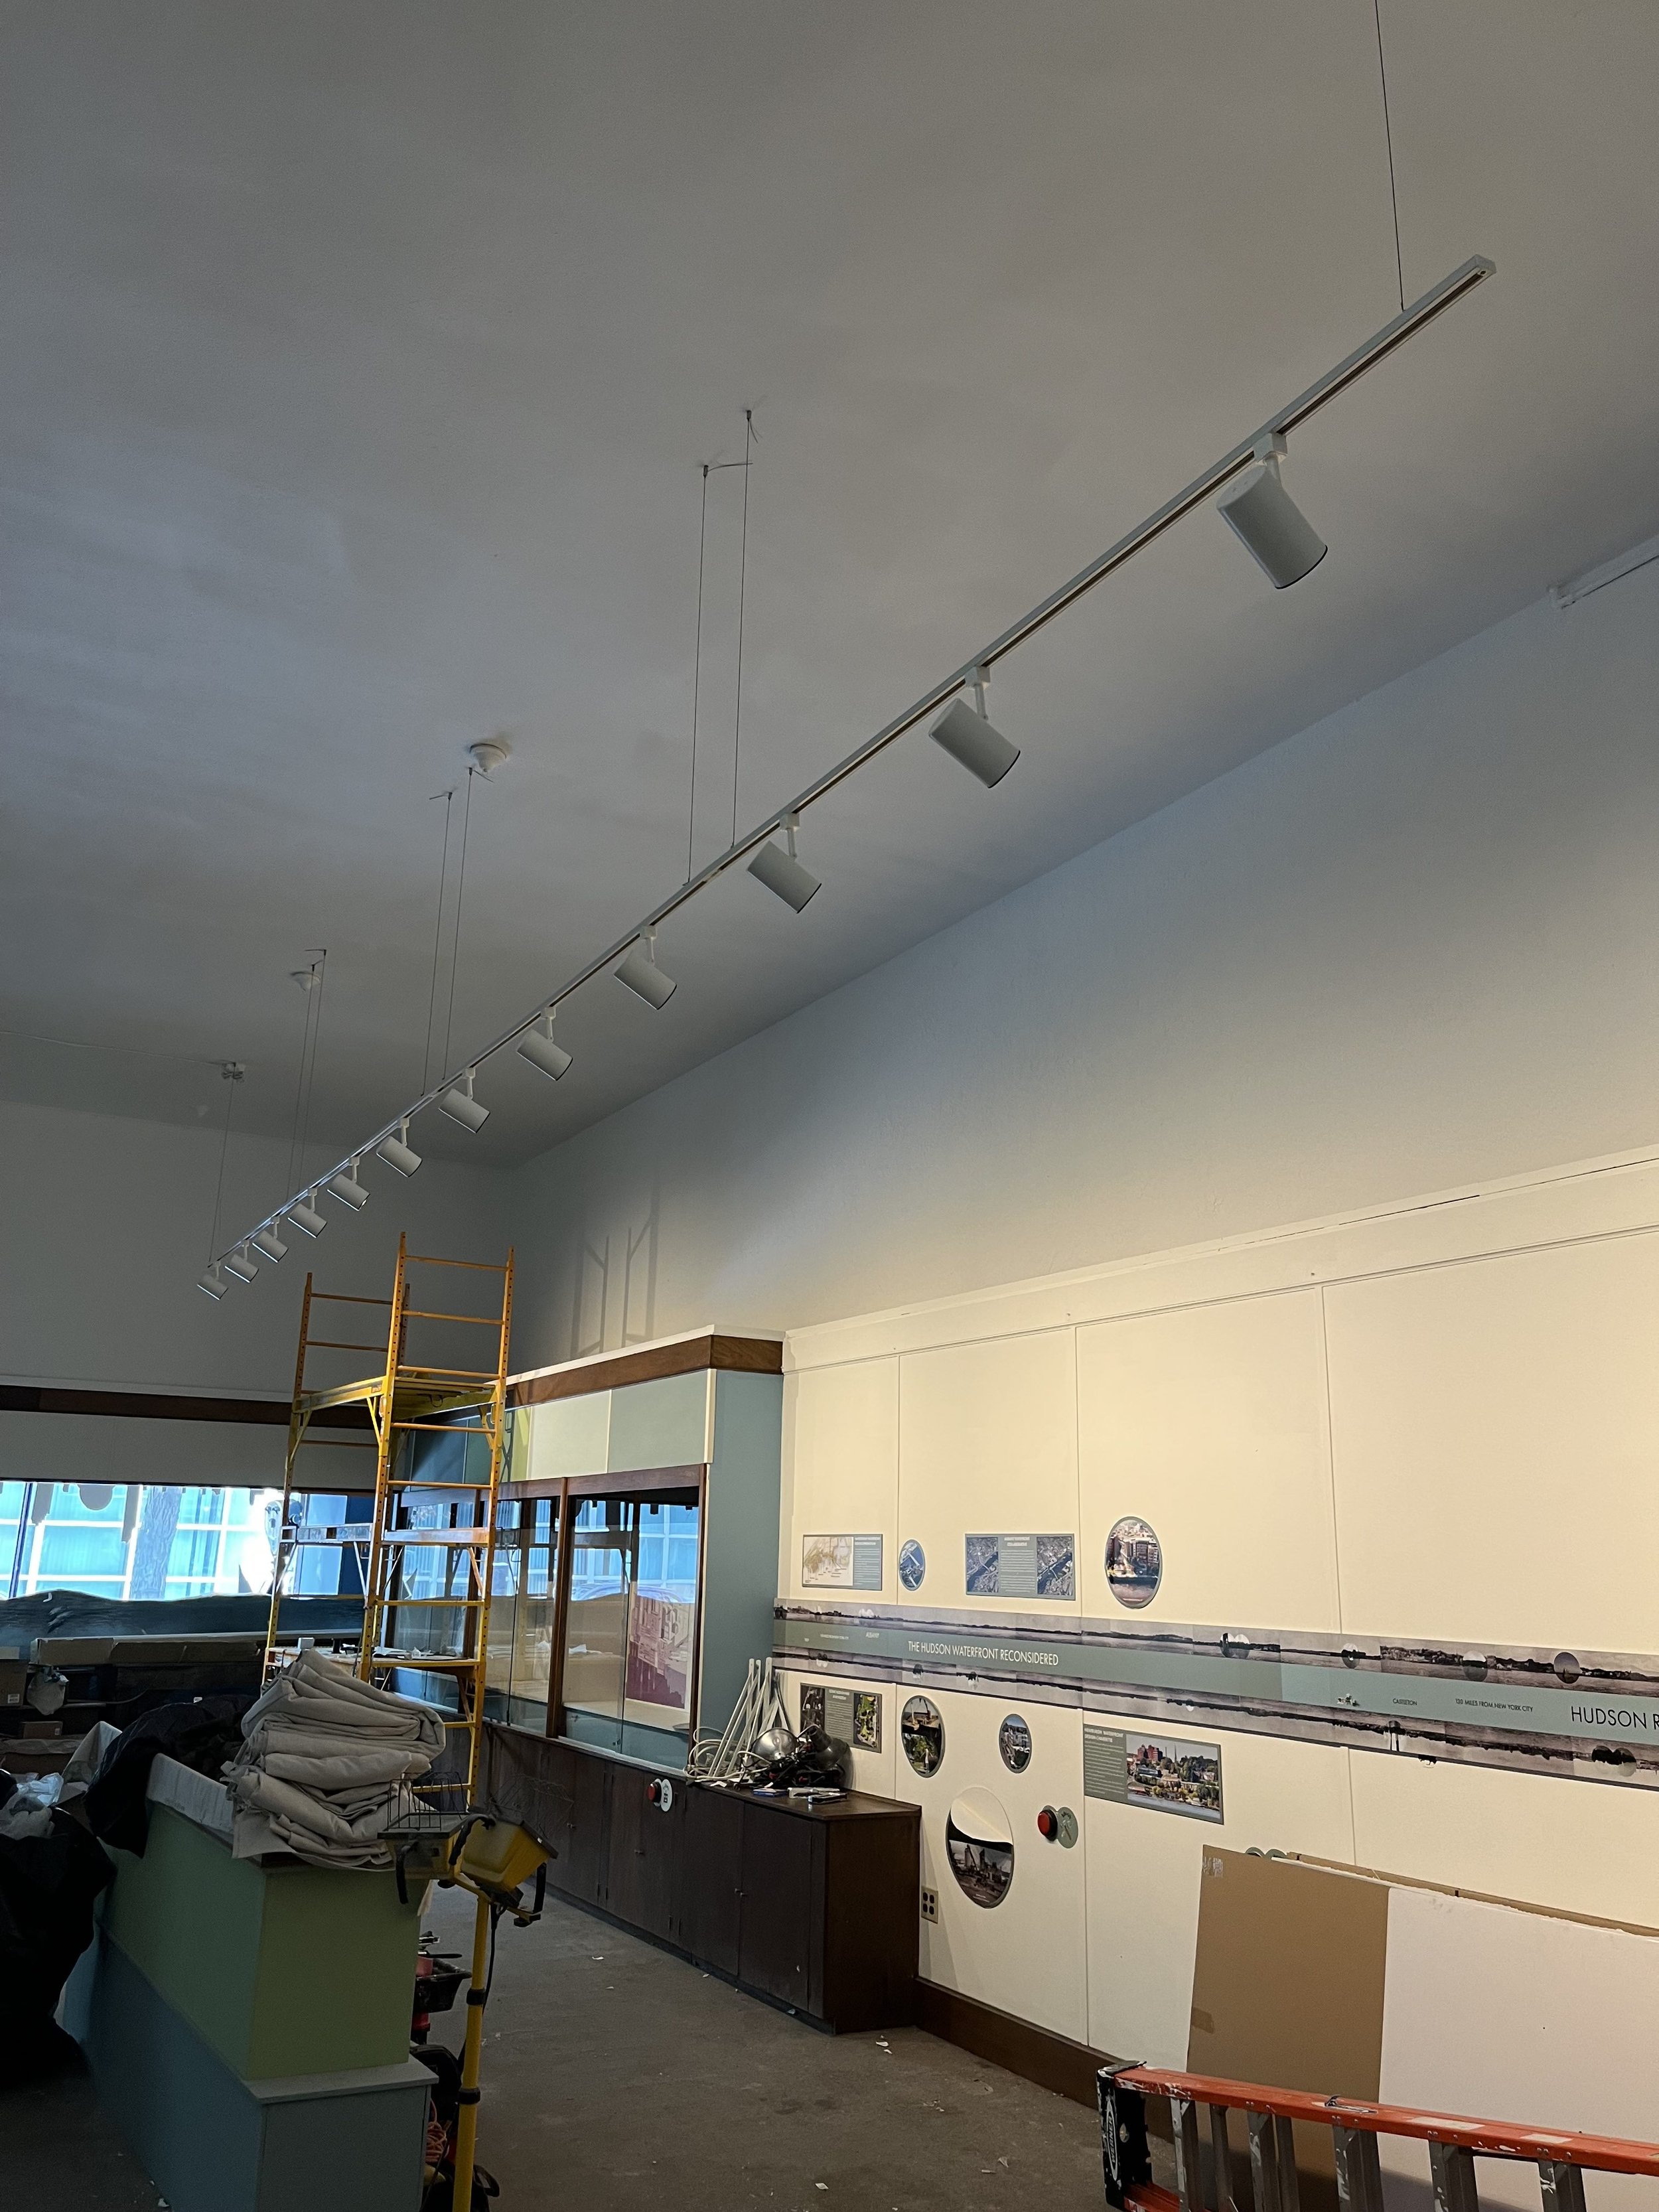   Drop ceilings were removed. Original 15’ ceiling were re-plastered. Lights were hung.  